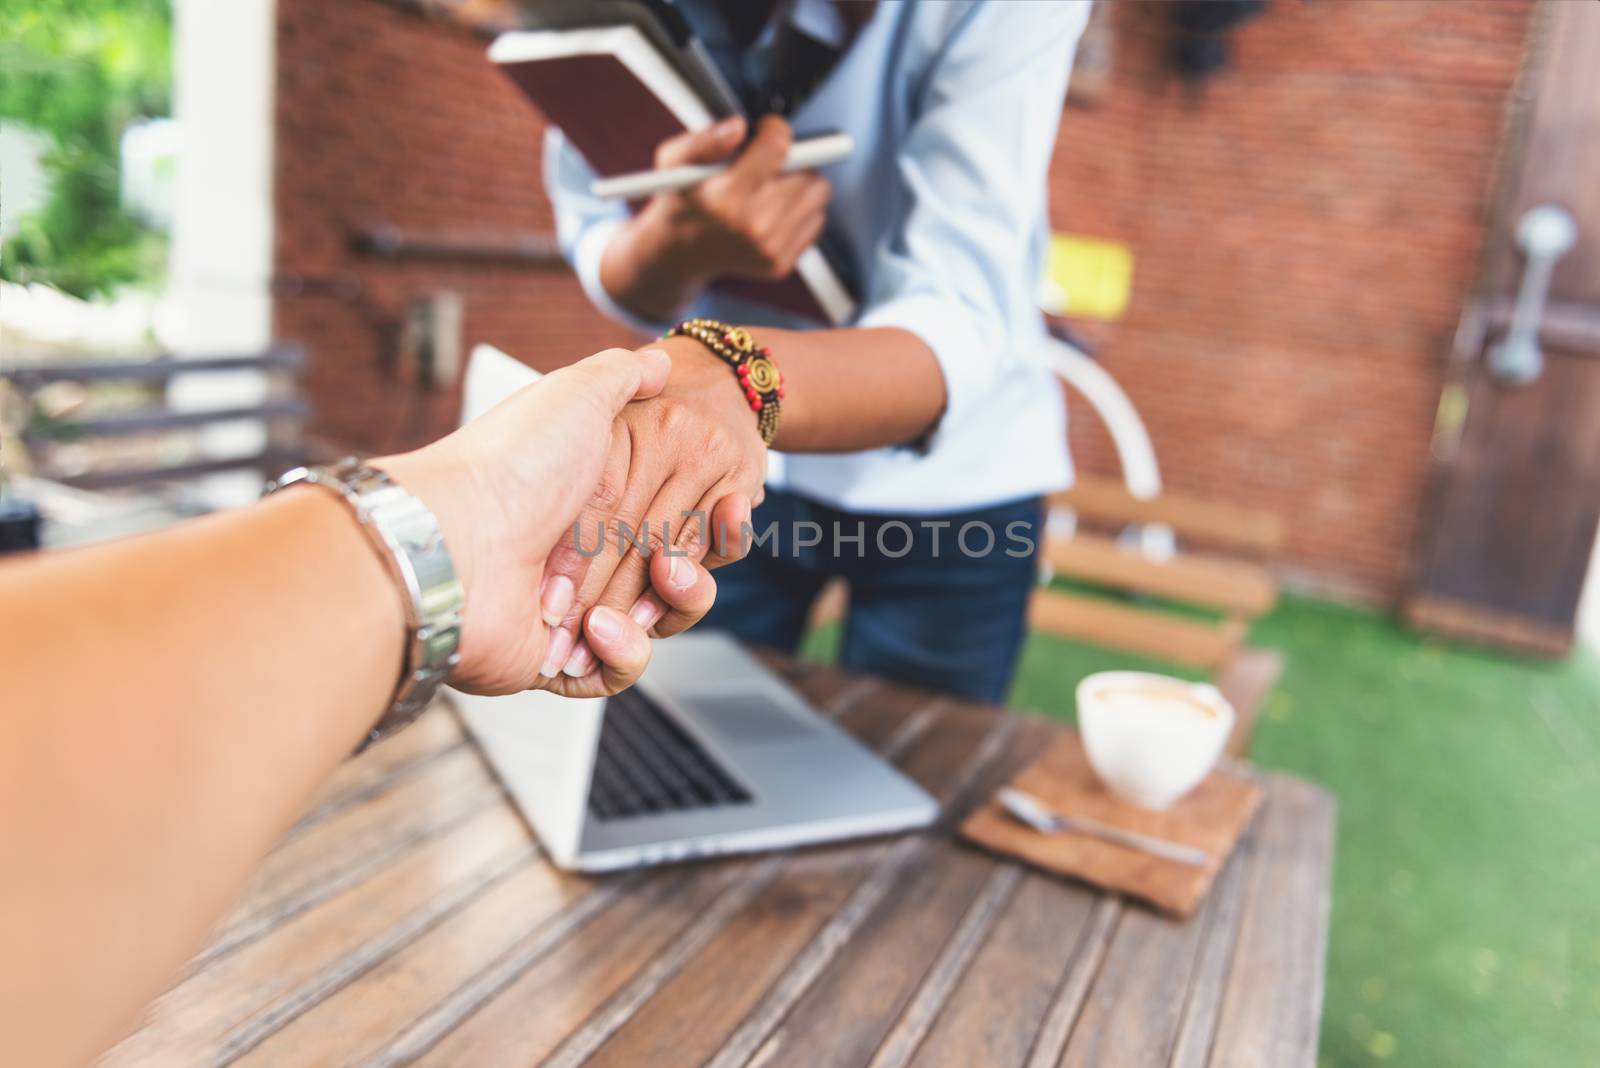 Photos of Asian women who are shaking hands,Focus on hand